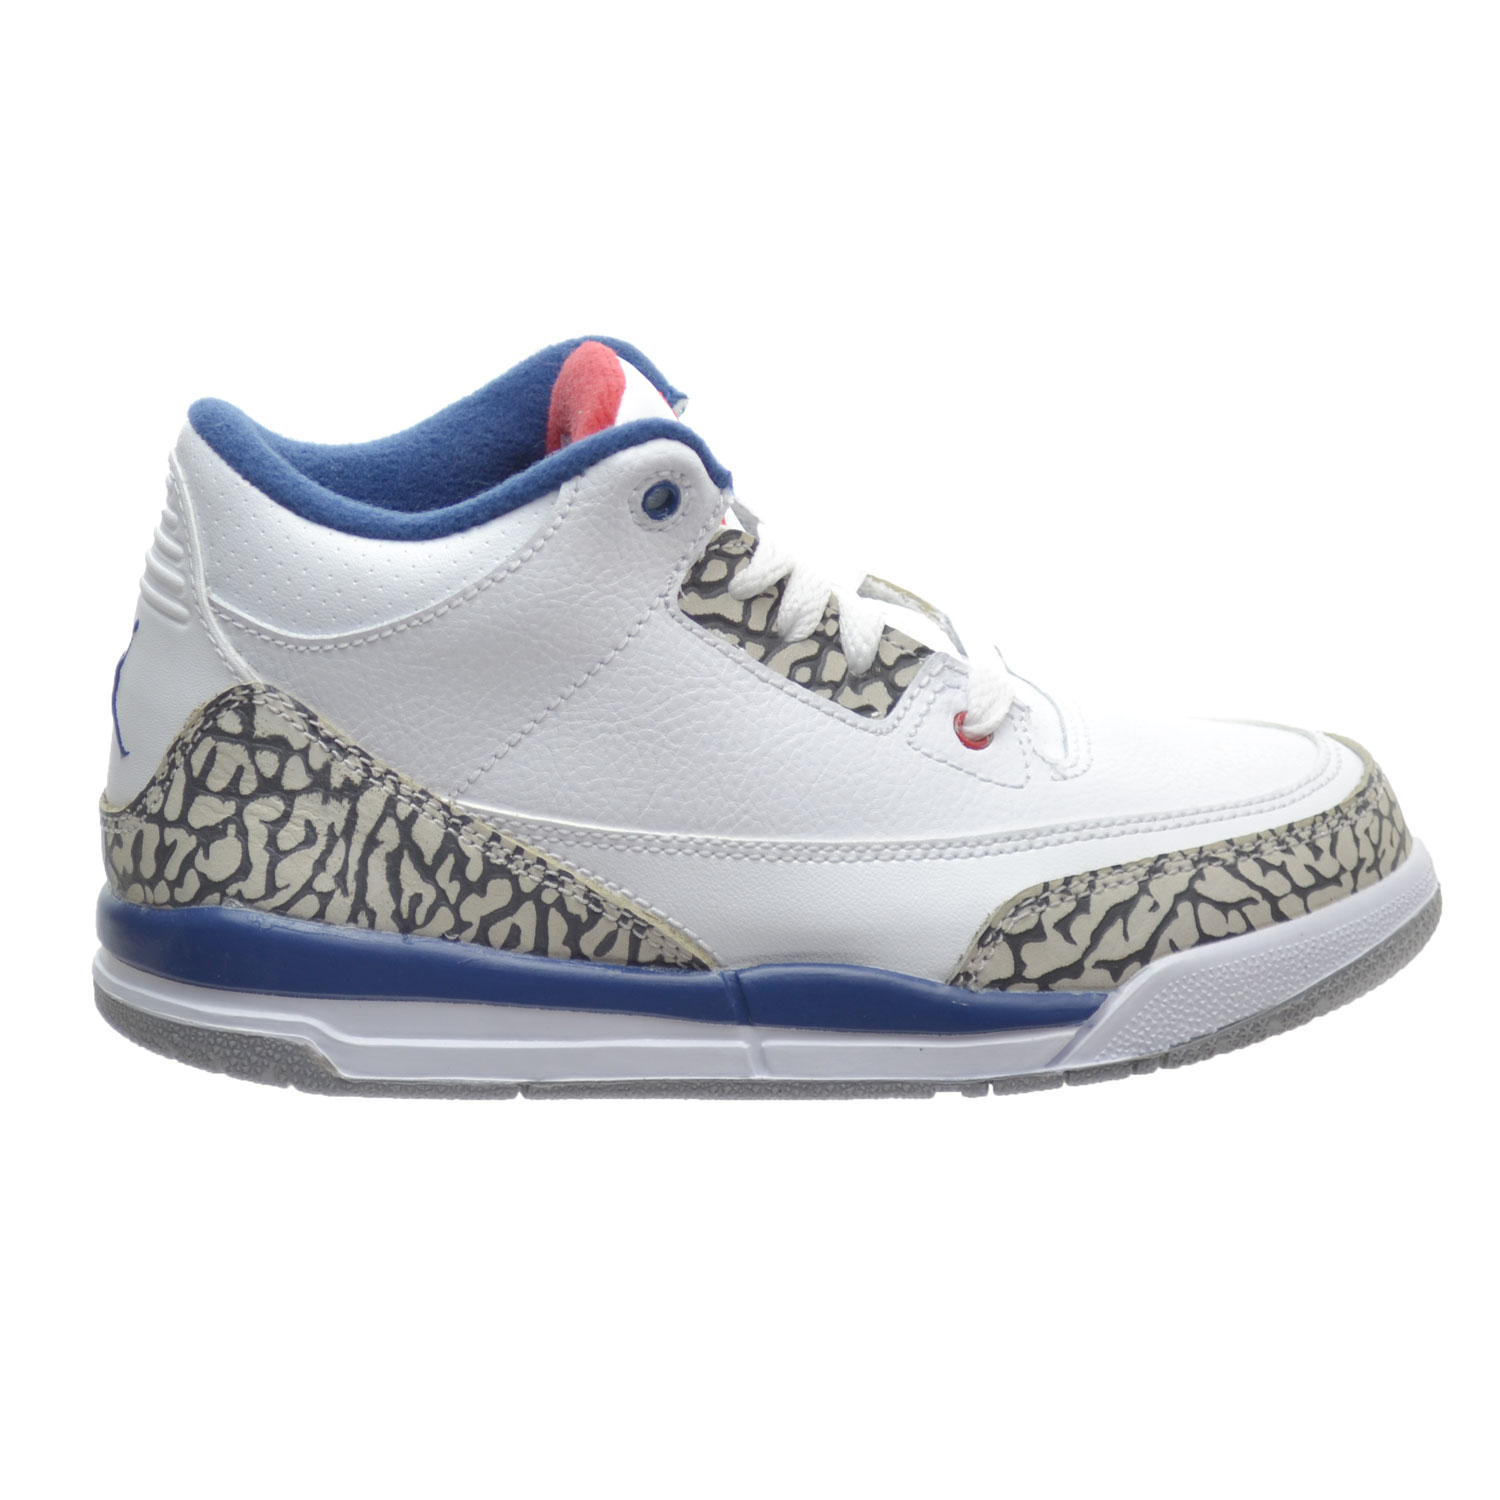 white blue and red jordan 3